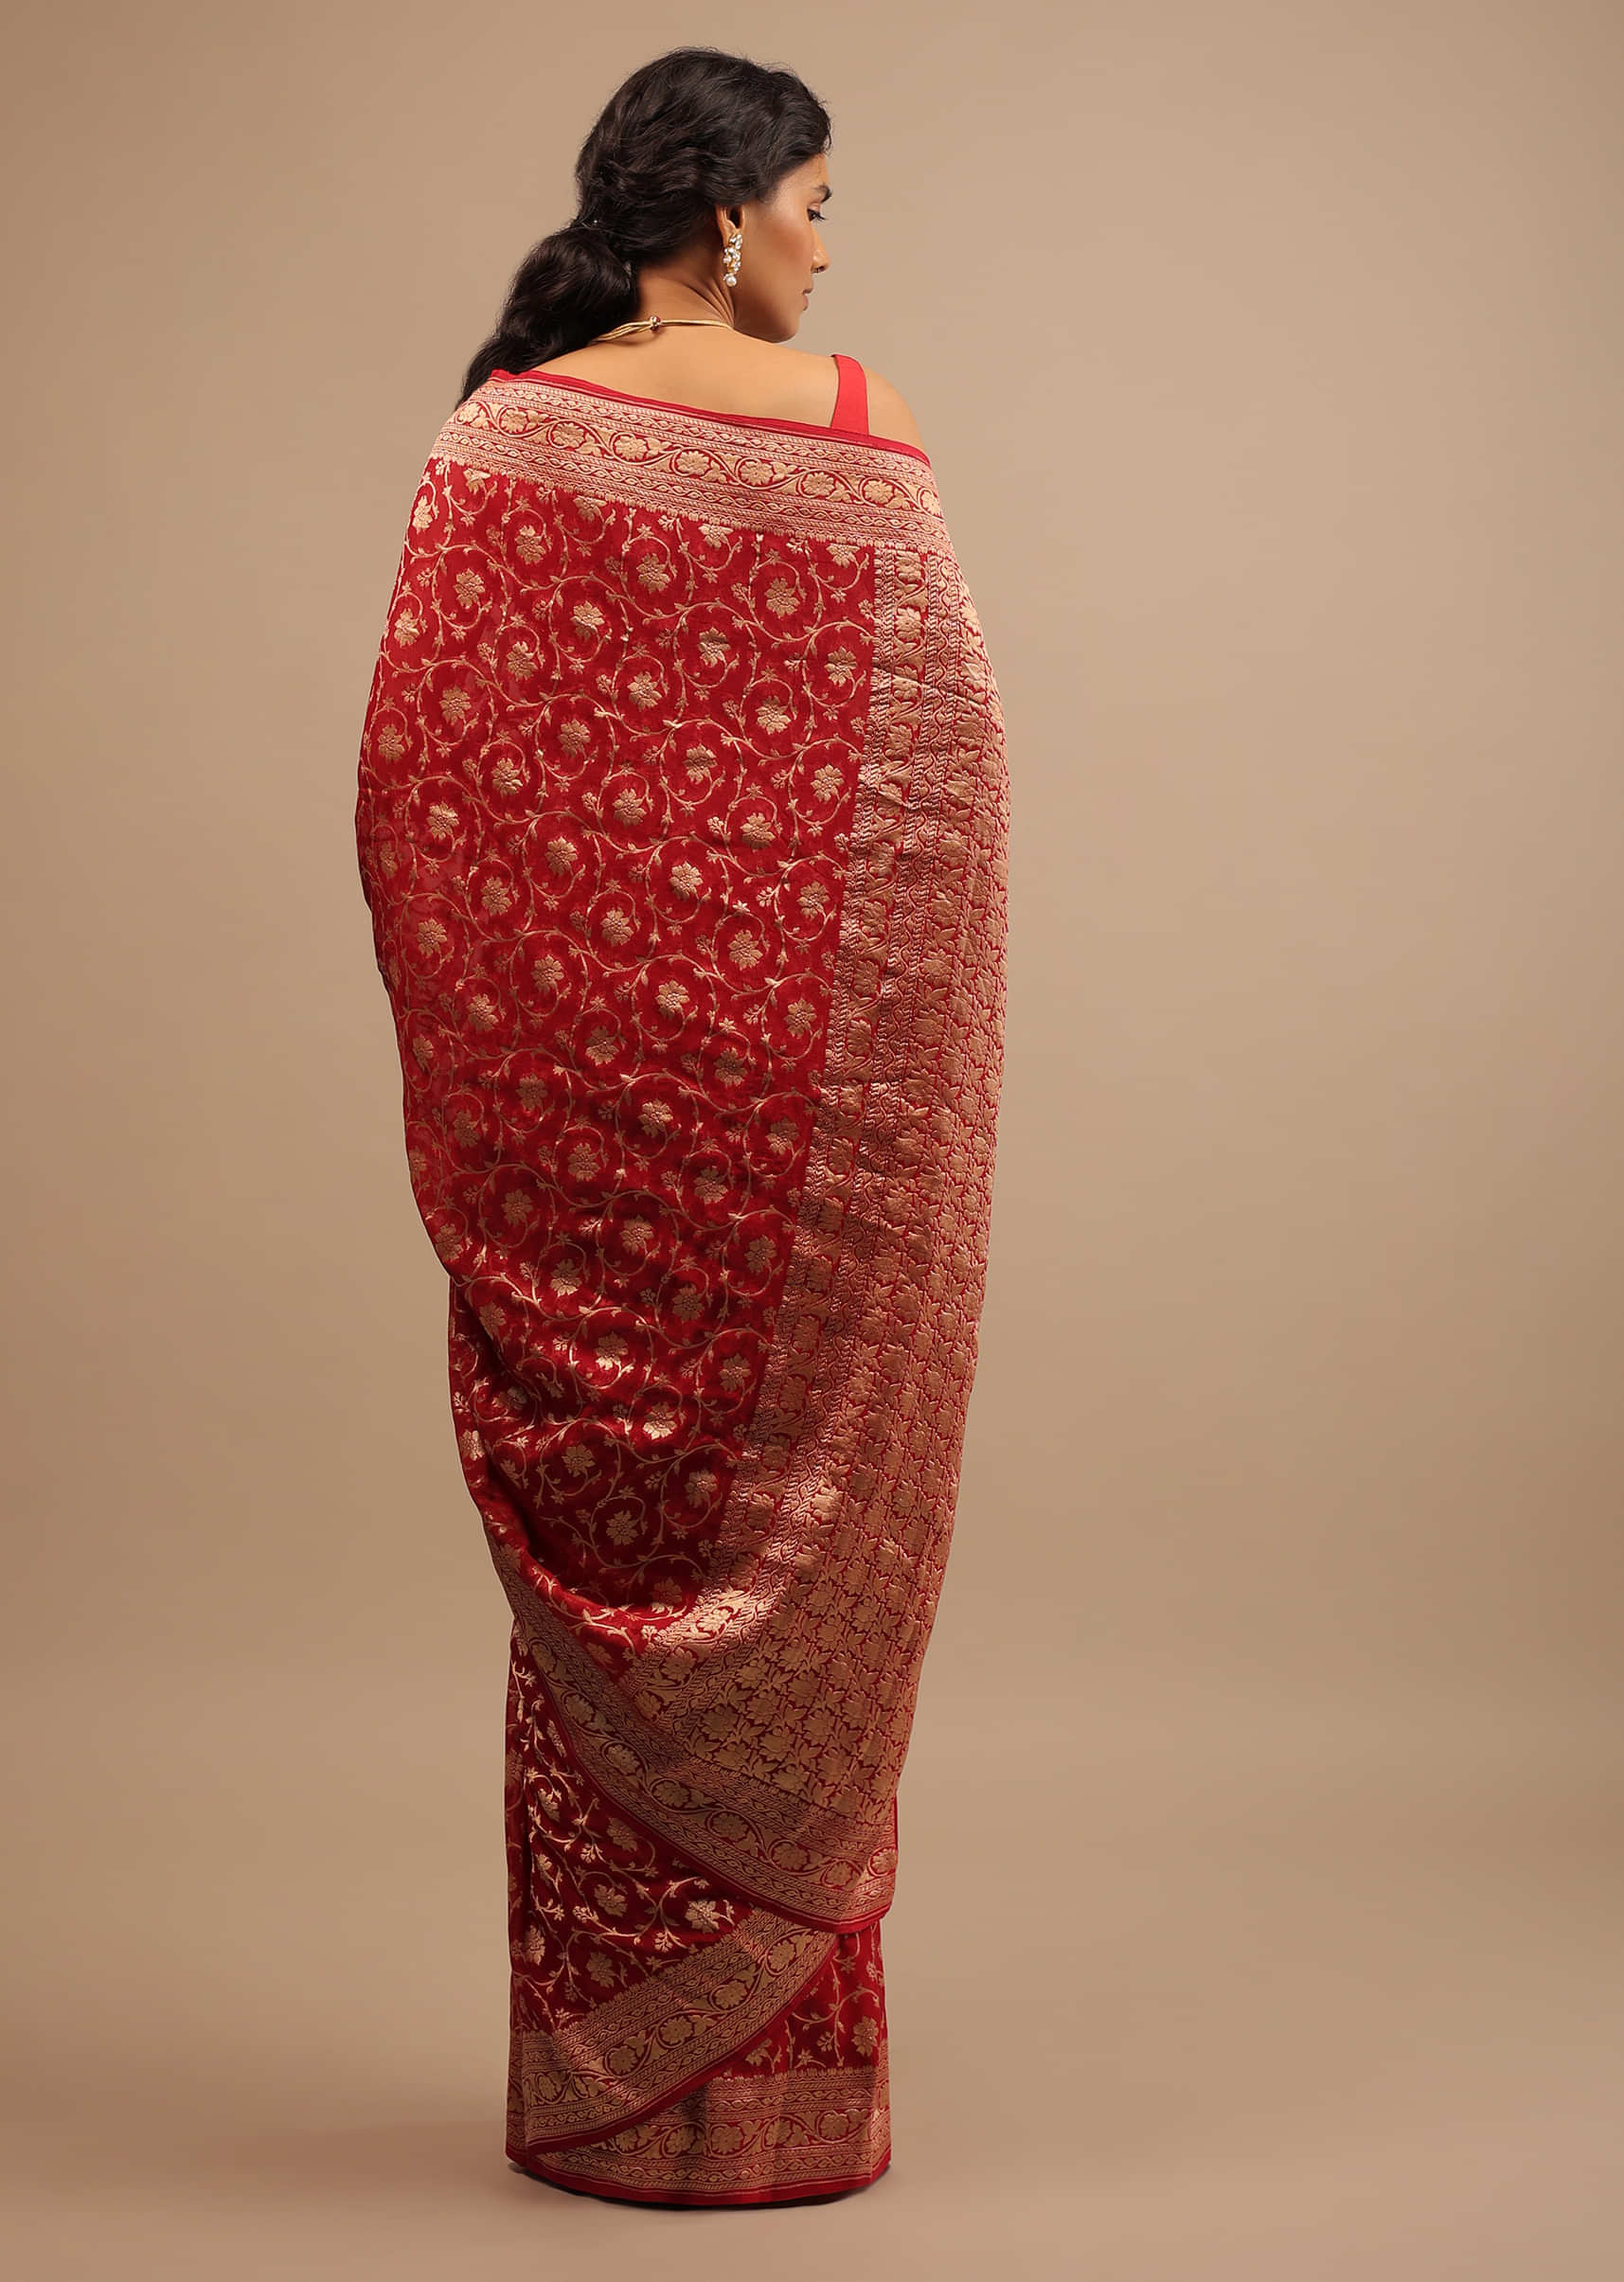 Apple Red Saree In Georgette With Golden Woven Floral Jaal Work